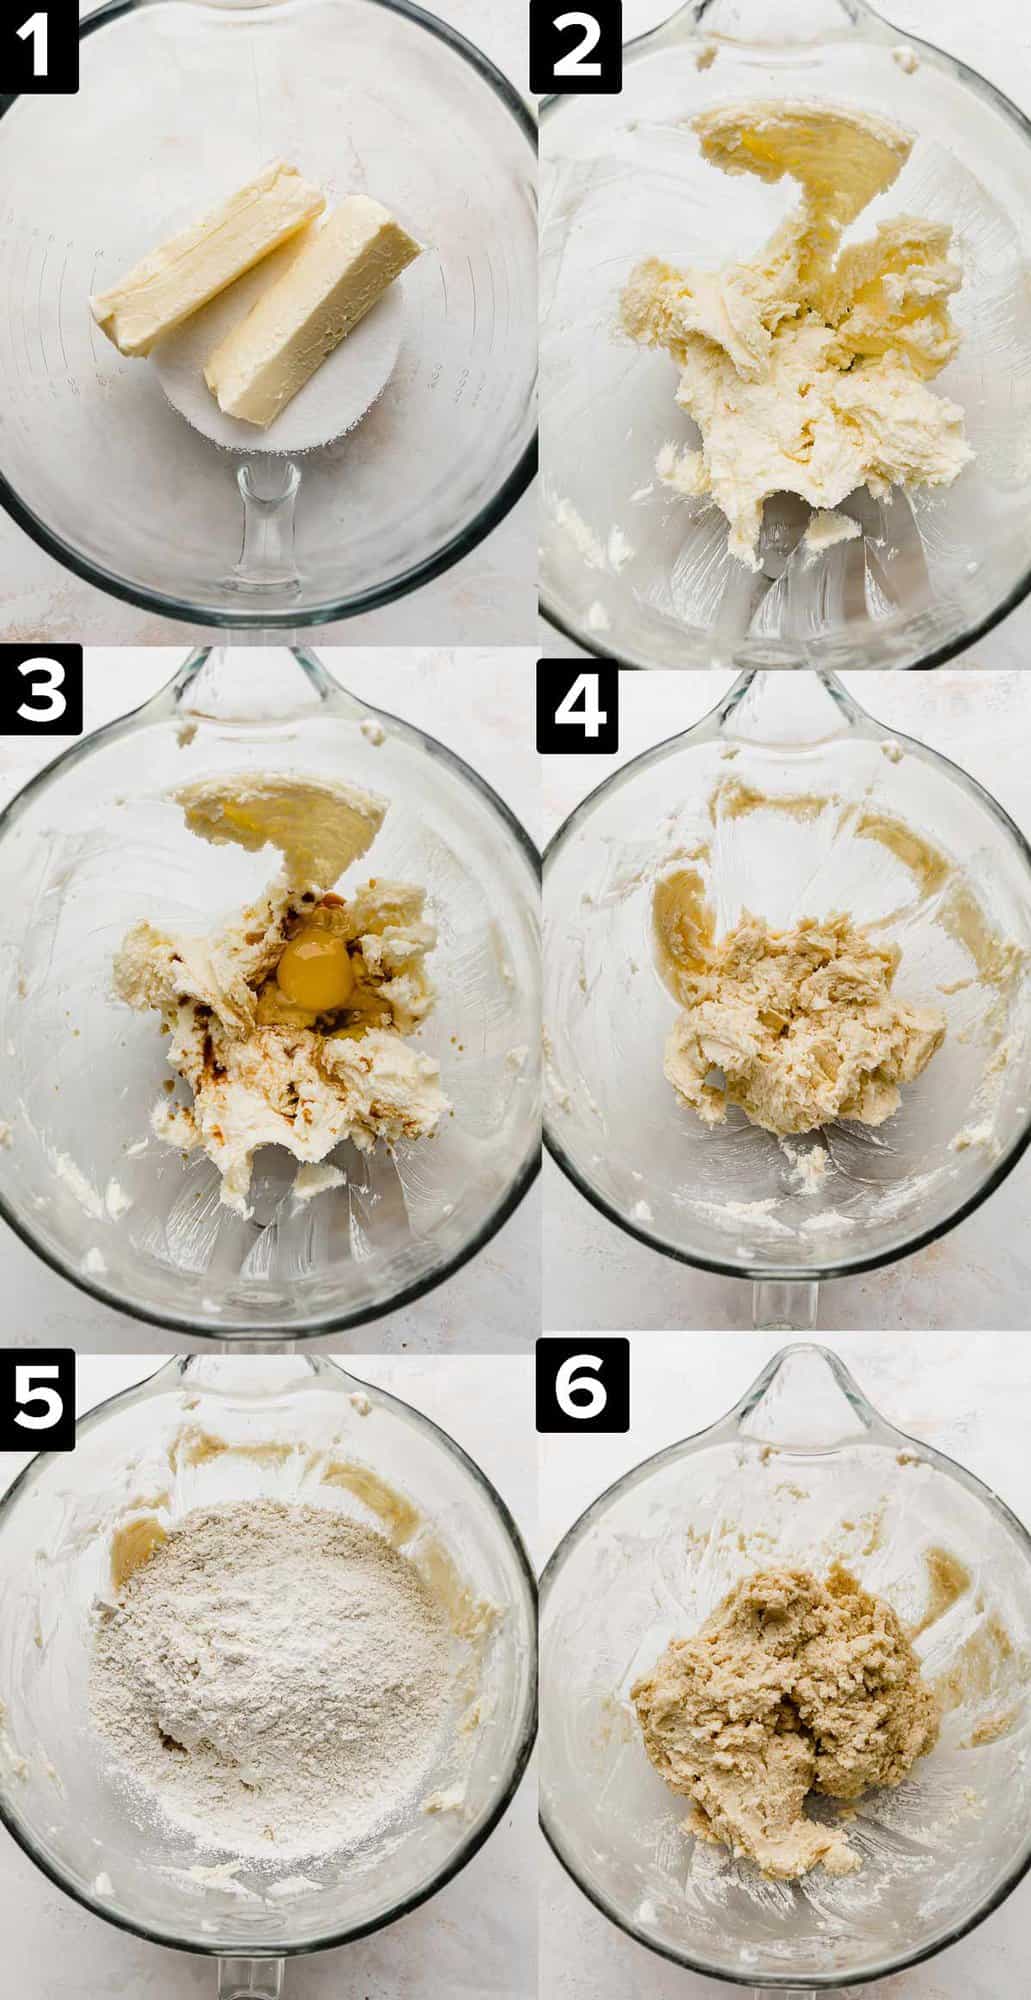 Six process photos showing how to make Sugar Cookie Bars, all photos feature a glass mixing bowl on a white background with various steps of adding butter, sugar, mixing and adding dry ingredients to form a dough.